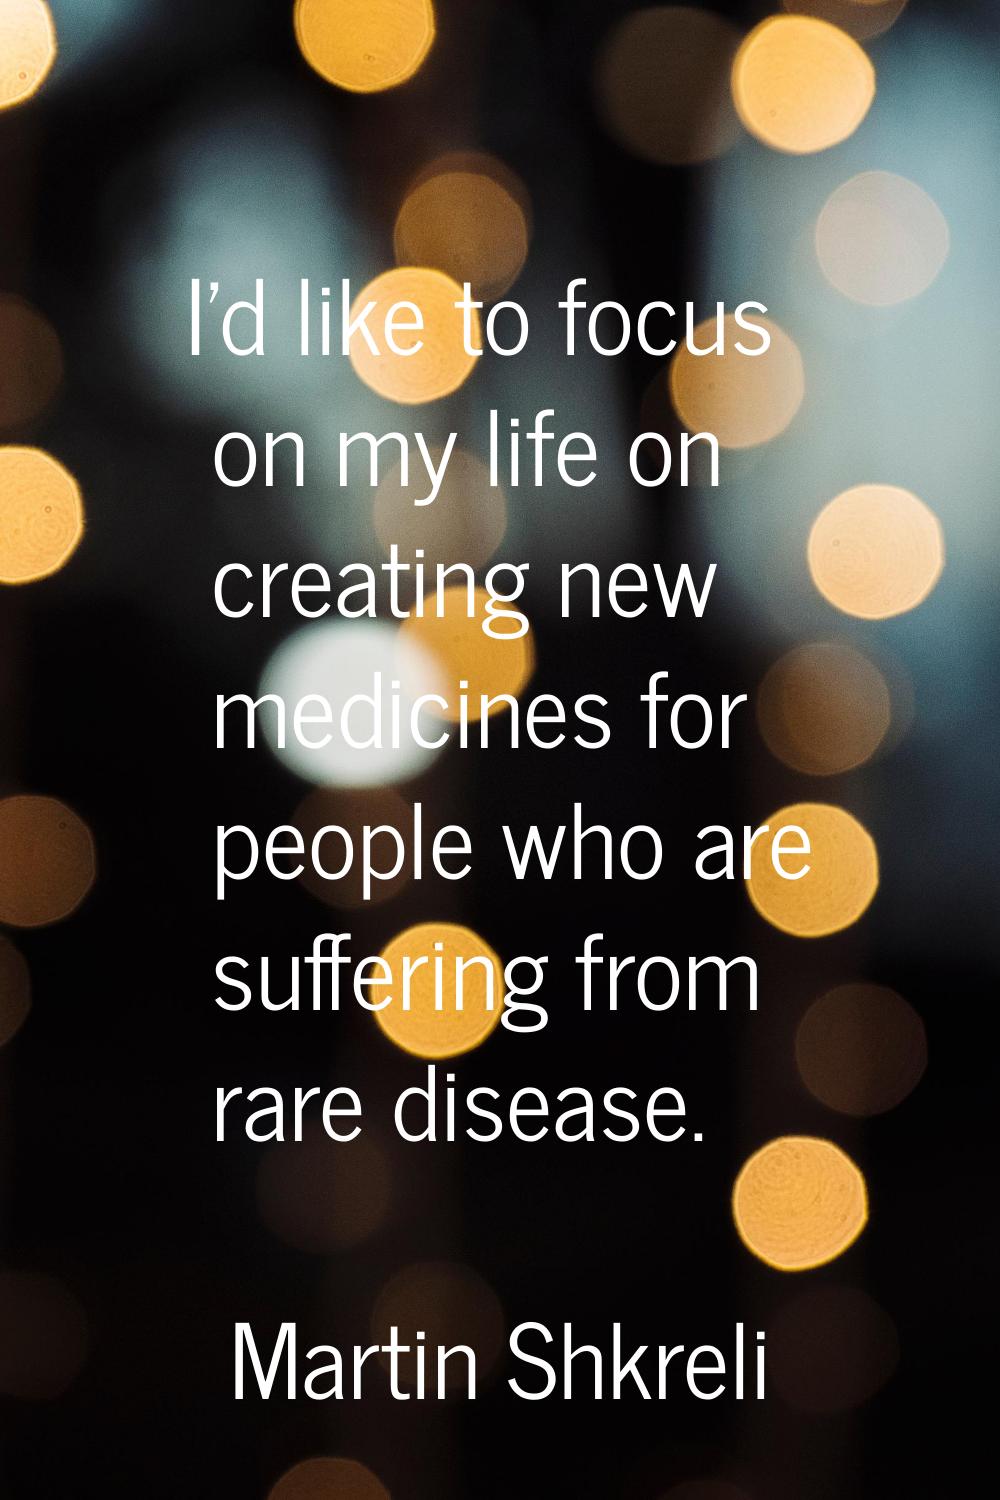 I'd like to focus on my life on creating new medicines for people who are suffering from rare disea